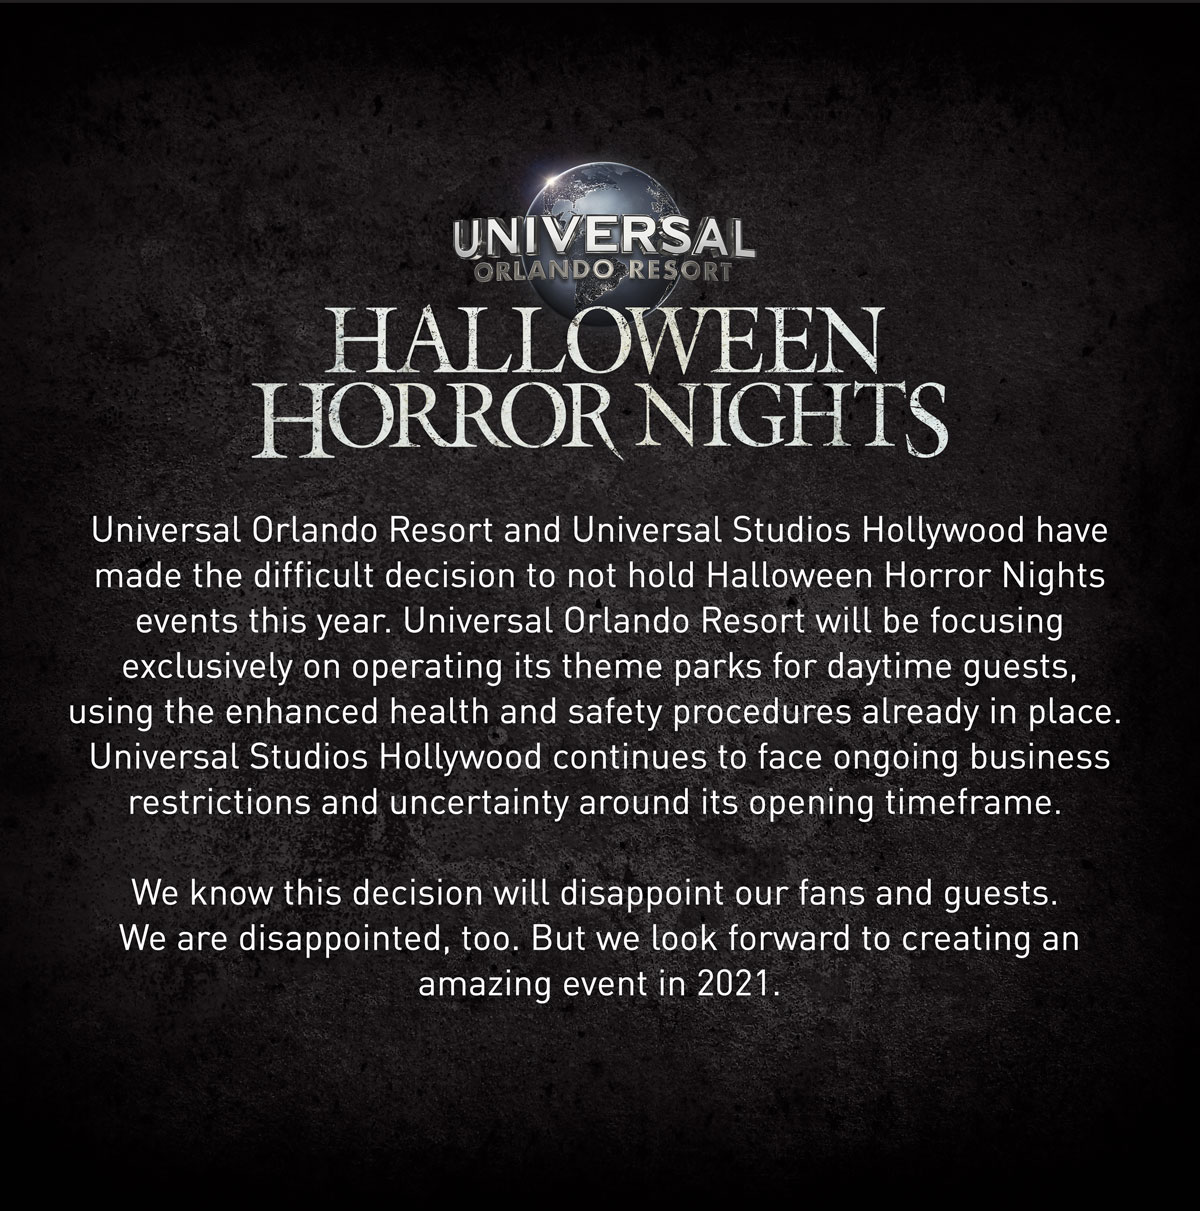 city of gods halloween 2020 cancelled Canceled Halloween Horror Nights At Universal Theme Parks Axed Amid Pandemic city of gods halloween 2020 cancelled